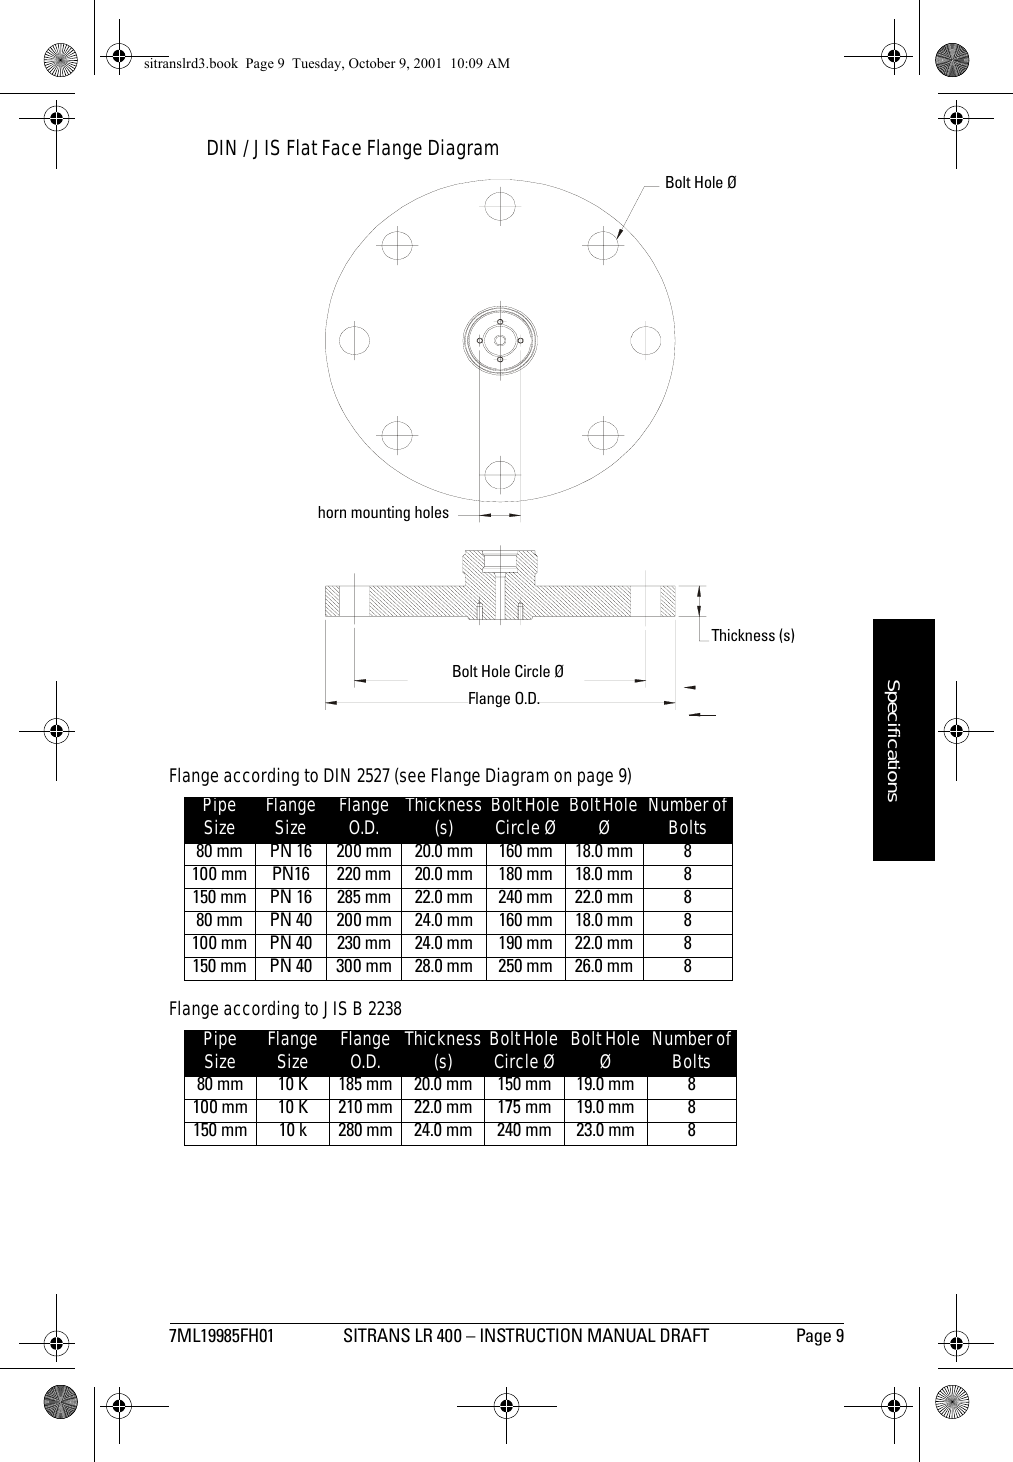 7ML19985FH01 SITRANS LR 400 – INSTRUCTION MANUAL DRAFT Page 9mmmmmSpecificationsDIN / JIS Flat Face Flange DiagramFlange according to DIN 2527 (see Flange Diagram on page 9)Flange according to JIS B 2238Pipe Size Flange Size Flange O.D. Thickness (s) Bolt Hole Circle Ø Bolt Hole ØNumber of Bolts80 mm PN 16 200 mm 20.0 mm 160 mm 18.0 mm 8100 mm PN16 220 mm 20.0 mm 180 mm 18.0 mm 8150 mm  PN 16 285 mm 22.0 mm 240 mm 22.0 mm 880 mm PN 40 200 mm 24.0 mm 160 mm 18.0 mm 8100 mm  PN 40 230 mm 24.0 mm 190 mm 22.0 mm 8150 mm  PN 40 300 mm 28.0 mm 250 mm 26.0 mm 8Pipe Size Flange Size Flange O.D. Thickness (s) Bolt Hole Circle Ø Bolt Hole ØNumber of Bolts80 mm 10 K 185 mm  20.0 mm 150 mm 19.0 mm 8100 mm 10 K 210 mm  22.0 mm 175 mm 19.0 mm 8150 mm 10 k 280 mm 24.0 mm 240 mm 23.0 mm 8Bolt Hole ØThickness (s)Flange O.D.Bolt Hole Circle Øhorn mounting holessitranslrd3.book  Page 9  Tuesday, October 9, 2001  10:09 AM